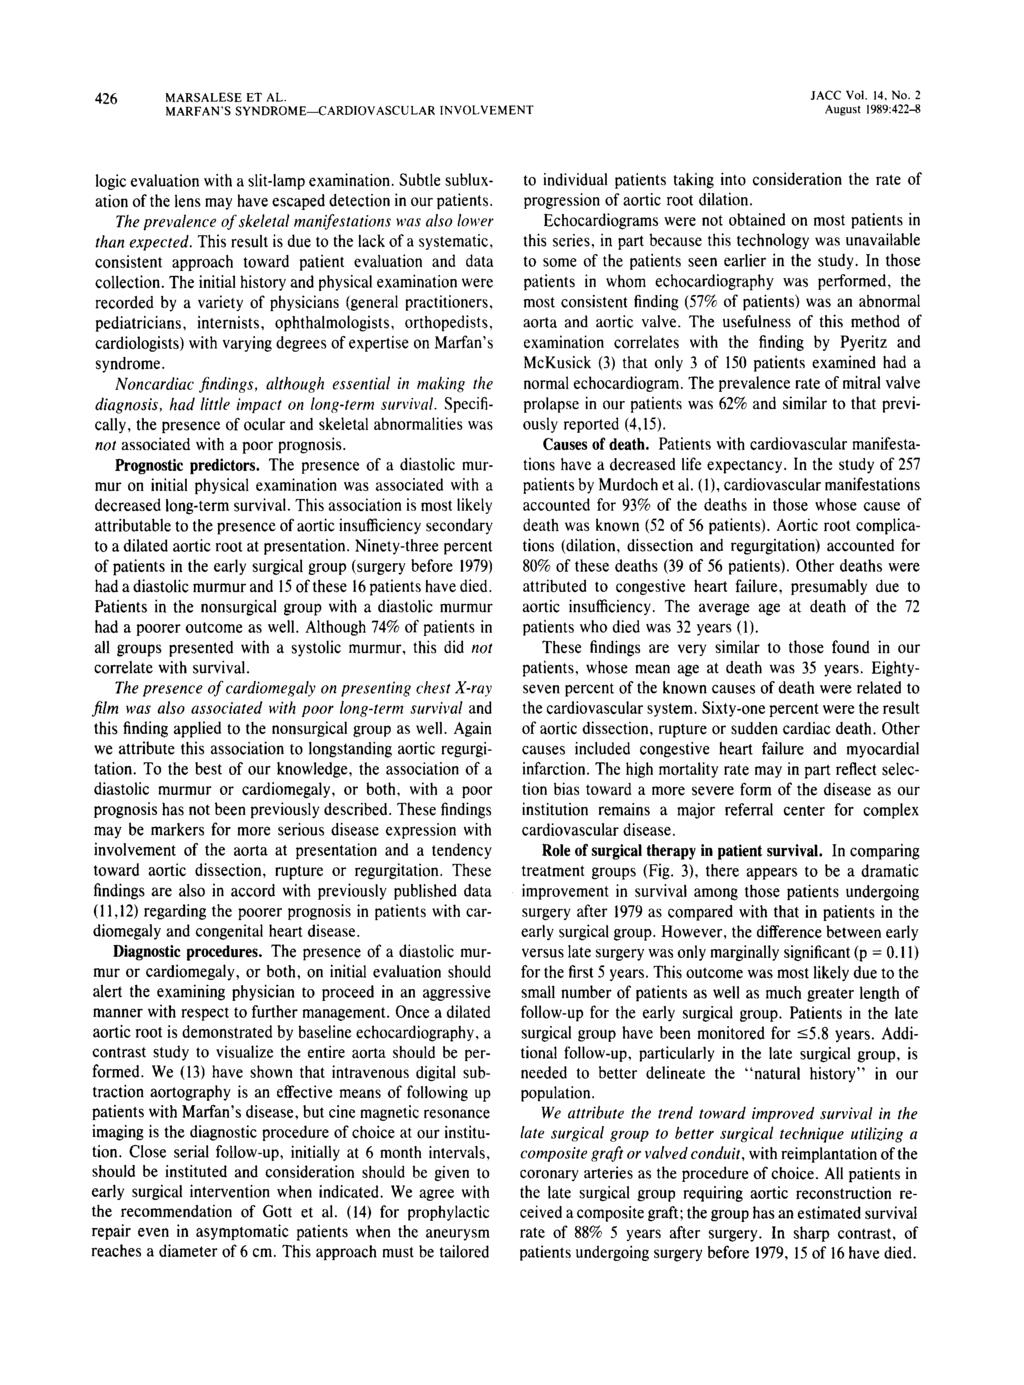 4 6 MARSALESE ET AL. JACC Vol. 14, No. MARFAN'S SYNDROME-CARDIOVASCULAR INVOLVEMENT August 1989 :4-8 logic evaluation with a slit-lamp examination.